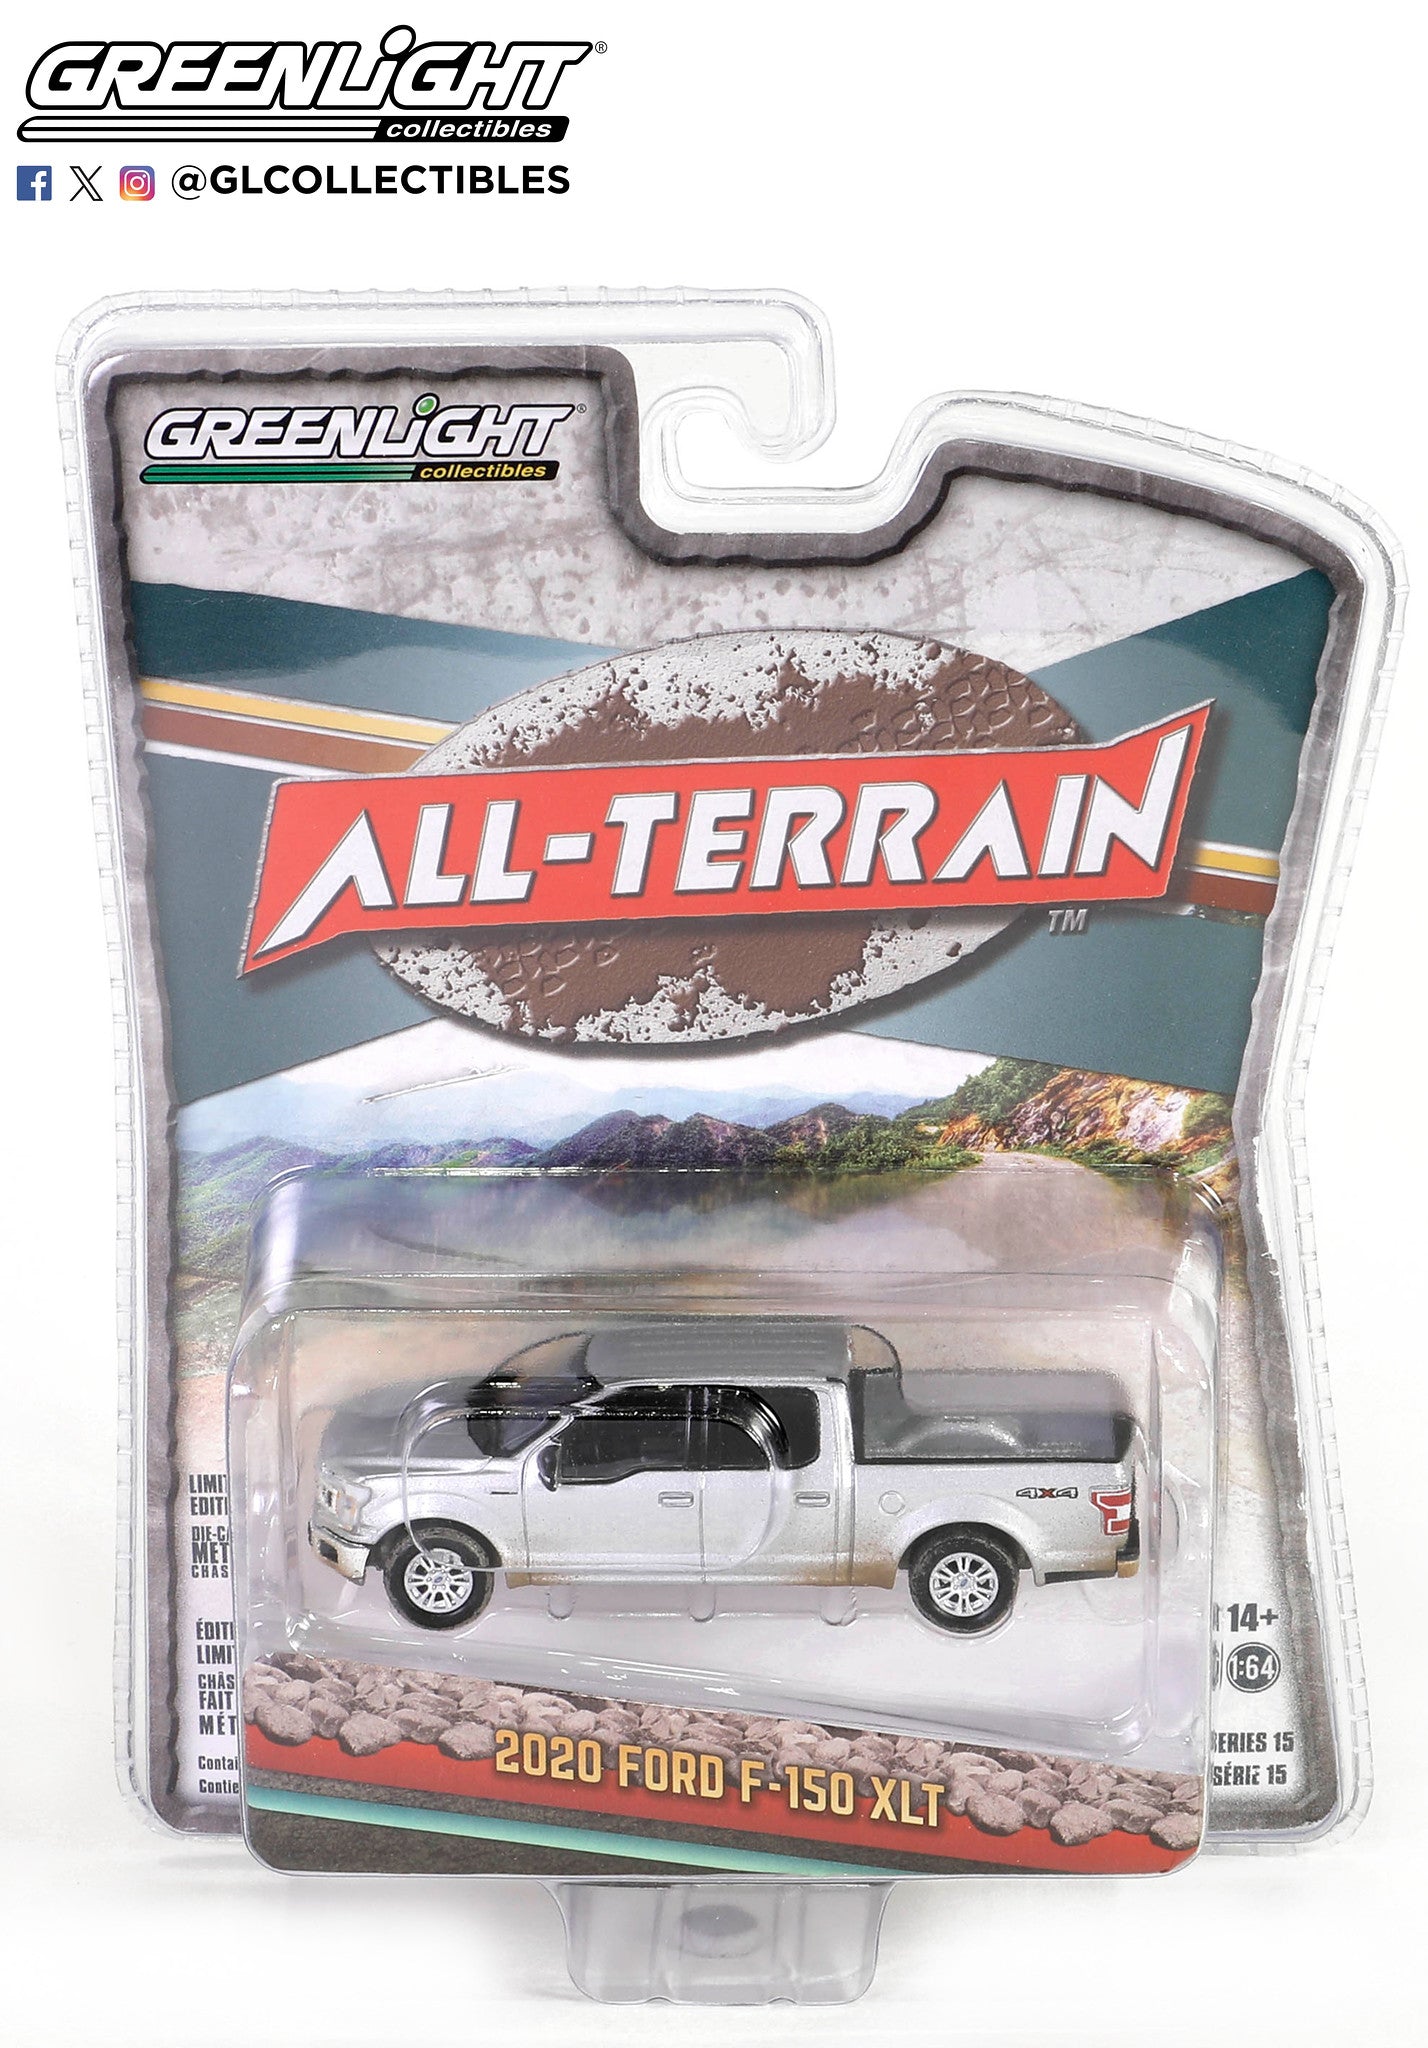 GreenLight 1:64 All-Terrain Series 15 - 2020 Ford F-150 SuperCrew - Iconic Silver with Mud Spray 35270-F